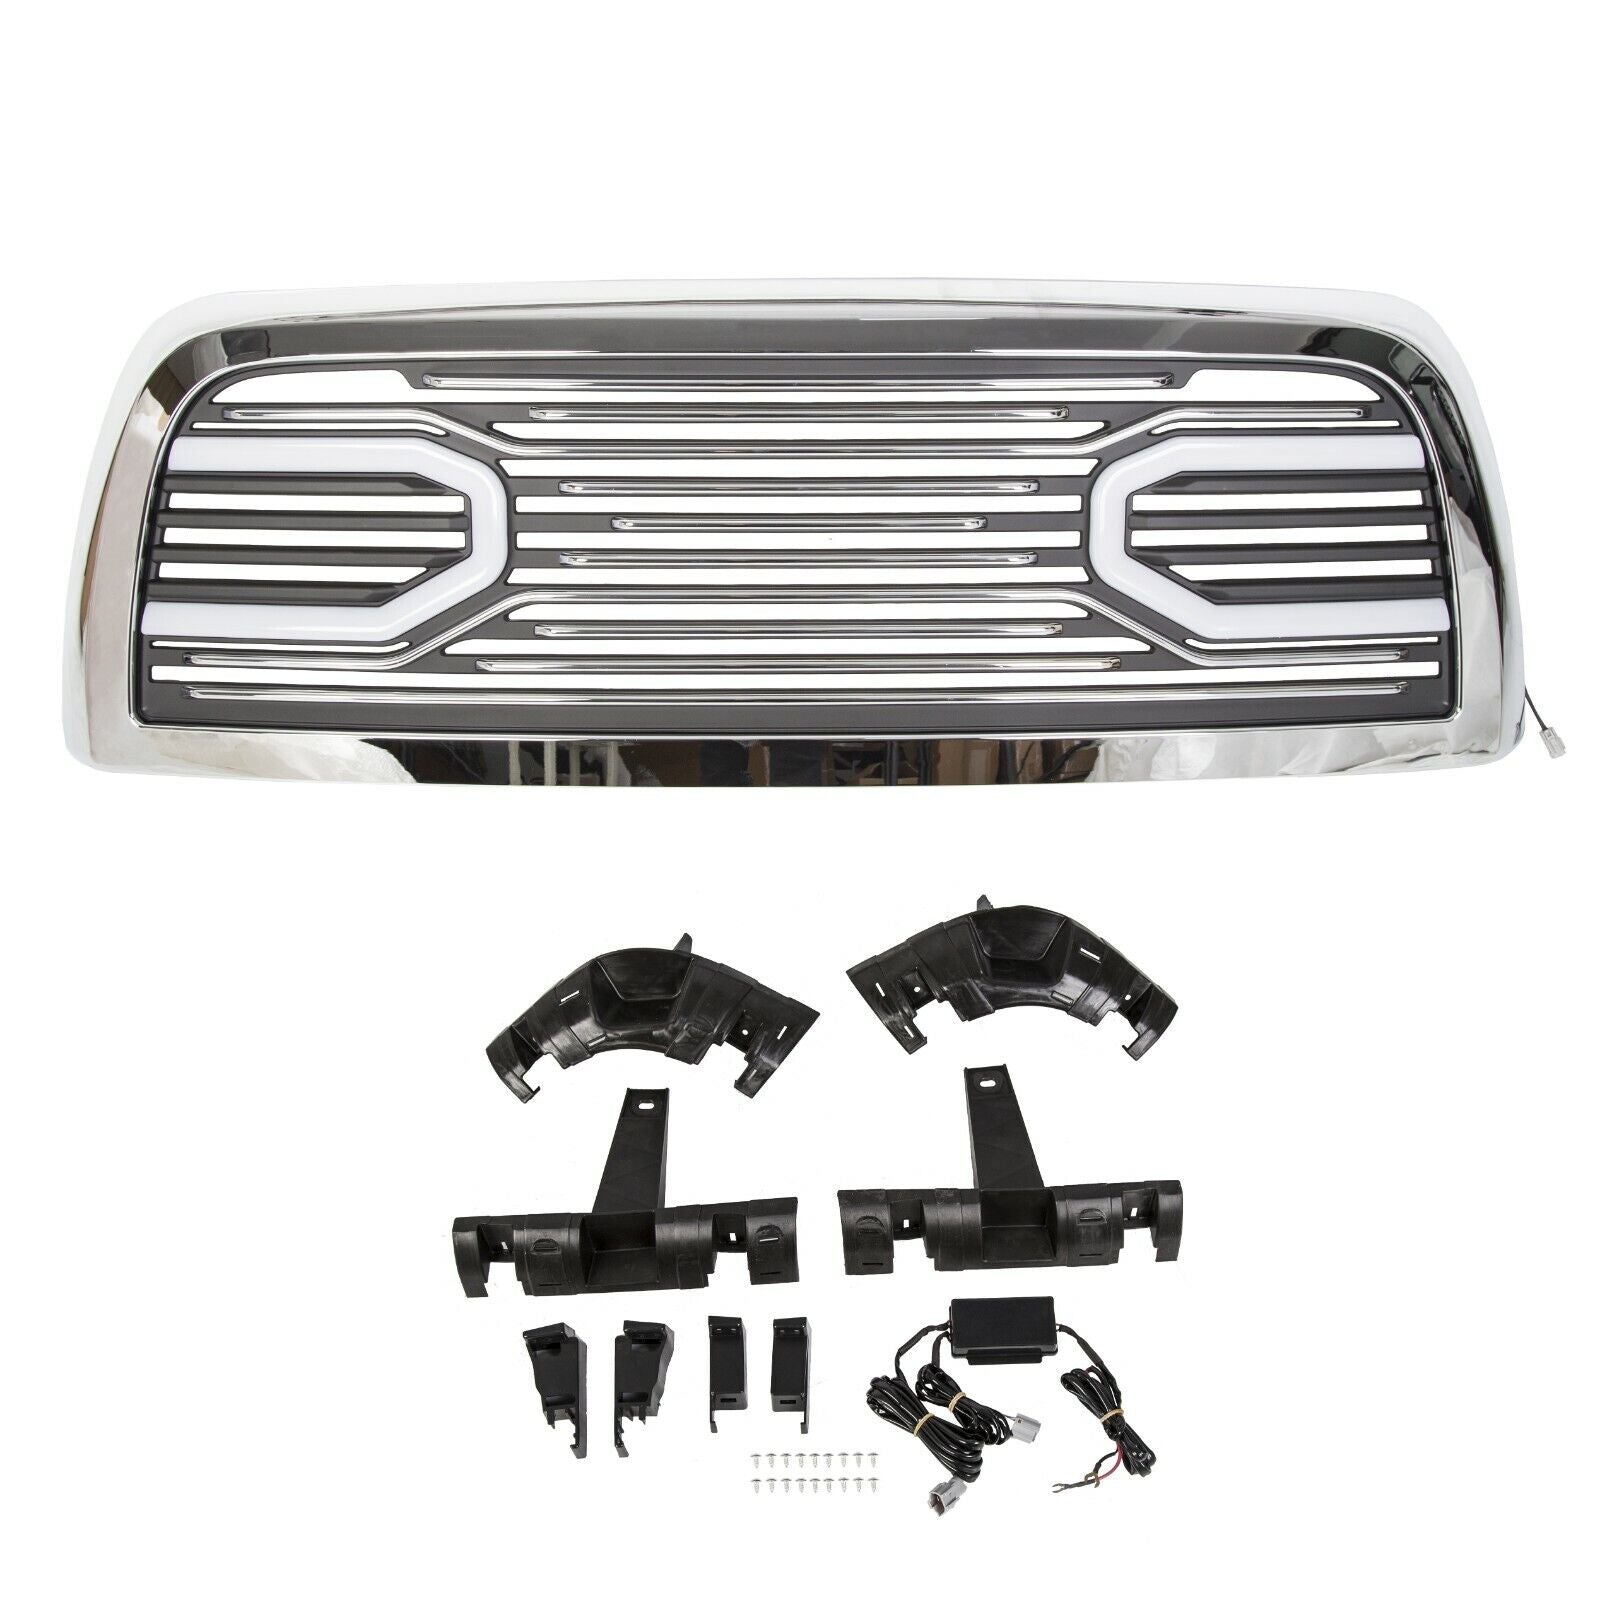 For 2010-2018 Dodge Ram 2500 3500 Big Horn Chrome Grille &Replacement Shell & Lights